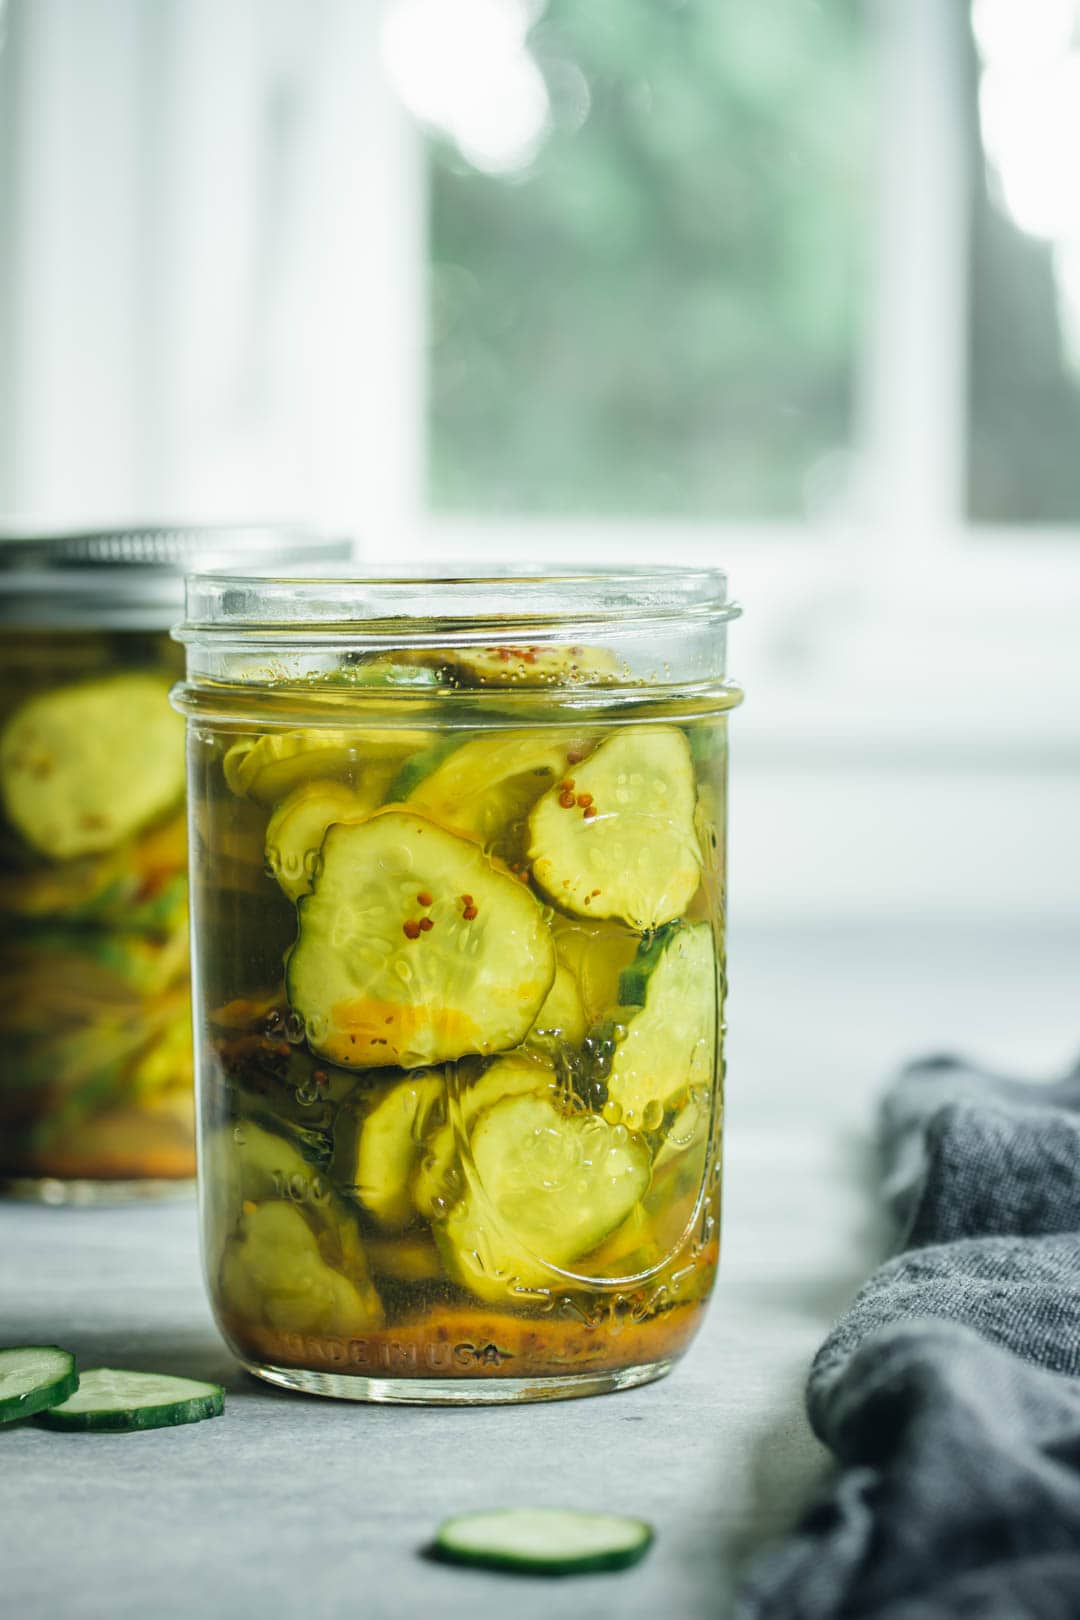 2 jars filled with refrigerator bread and butter pickles with 3 cucumbers and a napkin on side